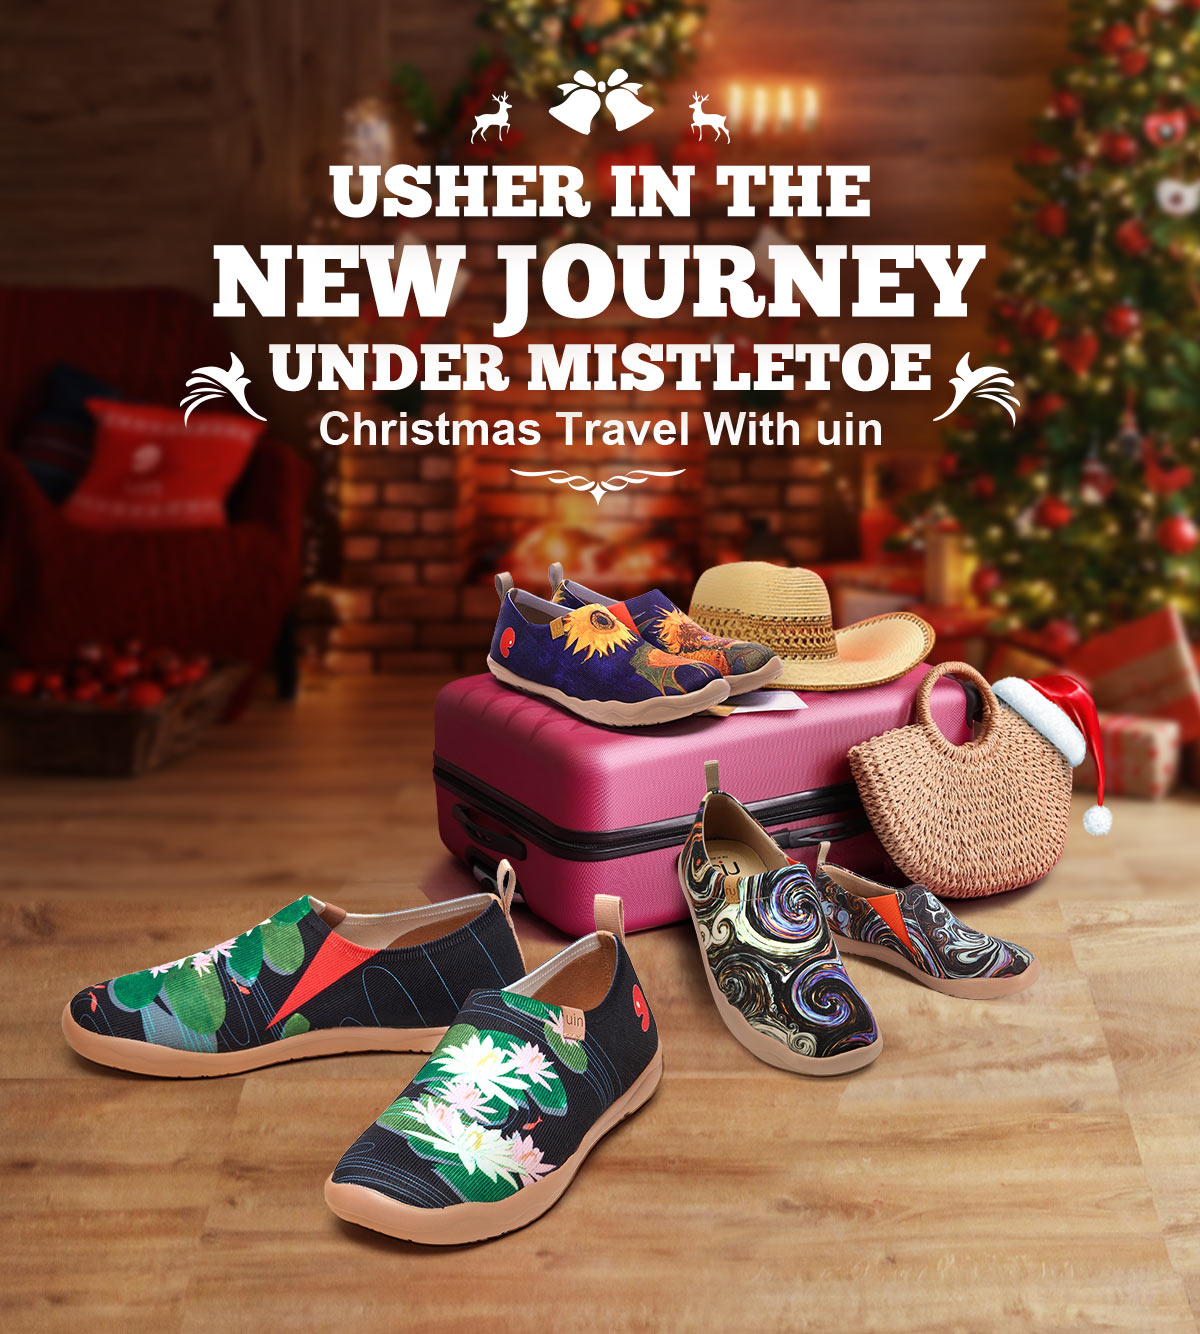 R A L300 i gt - NEW JOURNEY ;UNDER MISTLETOE b Christmas Travel With uin 